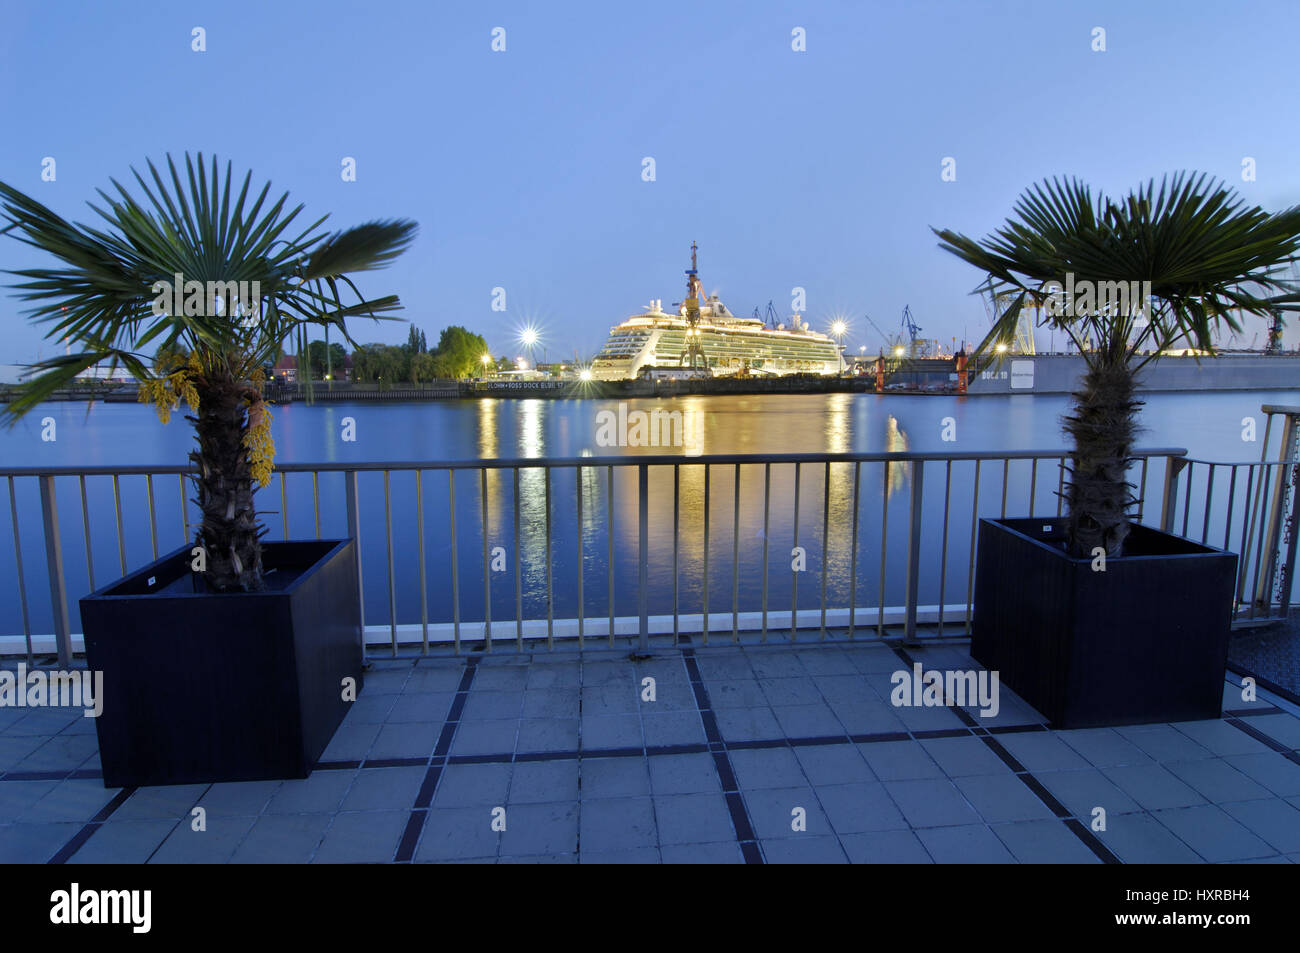 Germany, Hamburg, town, towns, hamburgers, harbour, evening, in the evening, in, dusk, dusk, dim light, the Elbe, Saint, Pauli, landing stages, palm,  Stock Photo